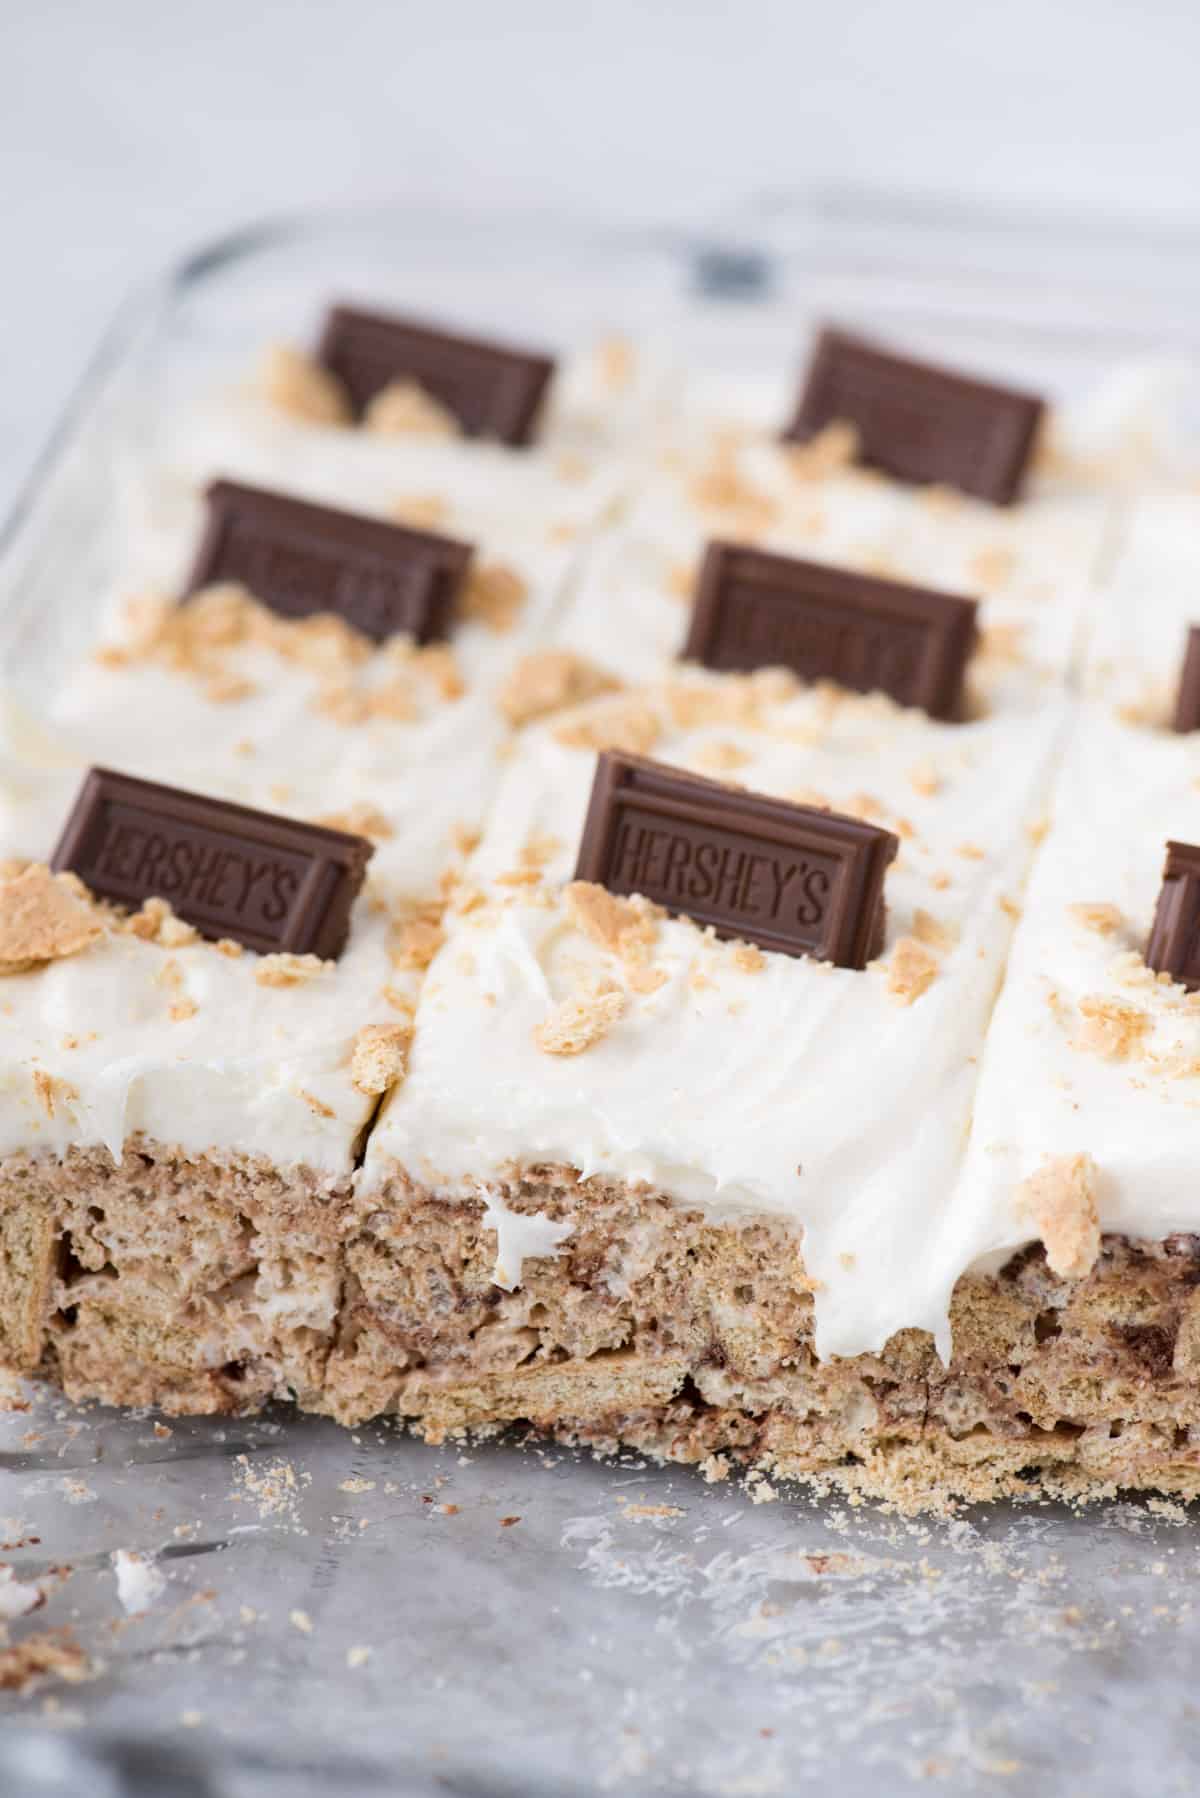 S’mores bars with marshmallow frosting and hershey’s chocolate bars in glass 9x13 inch pan